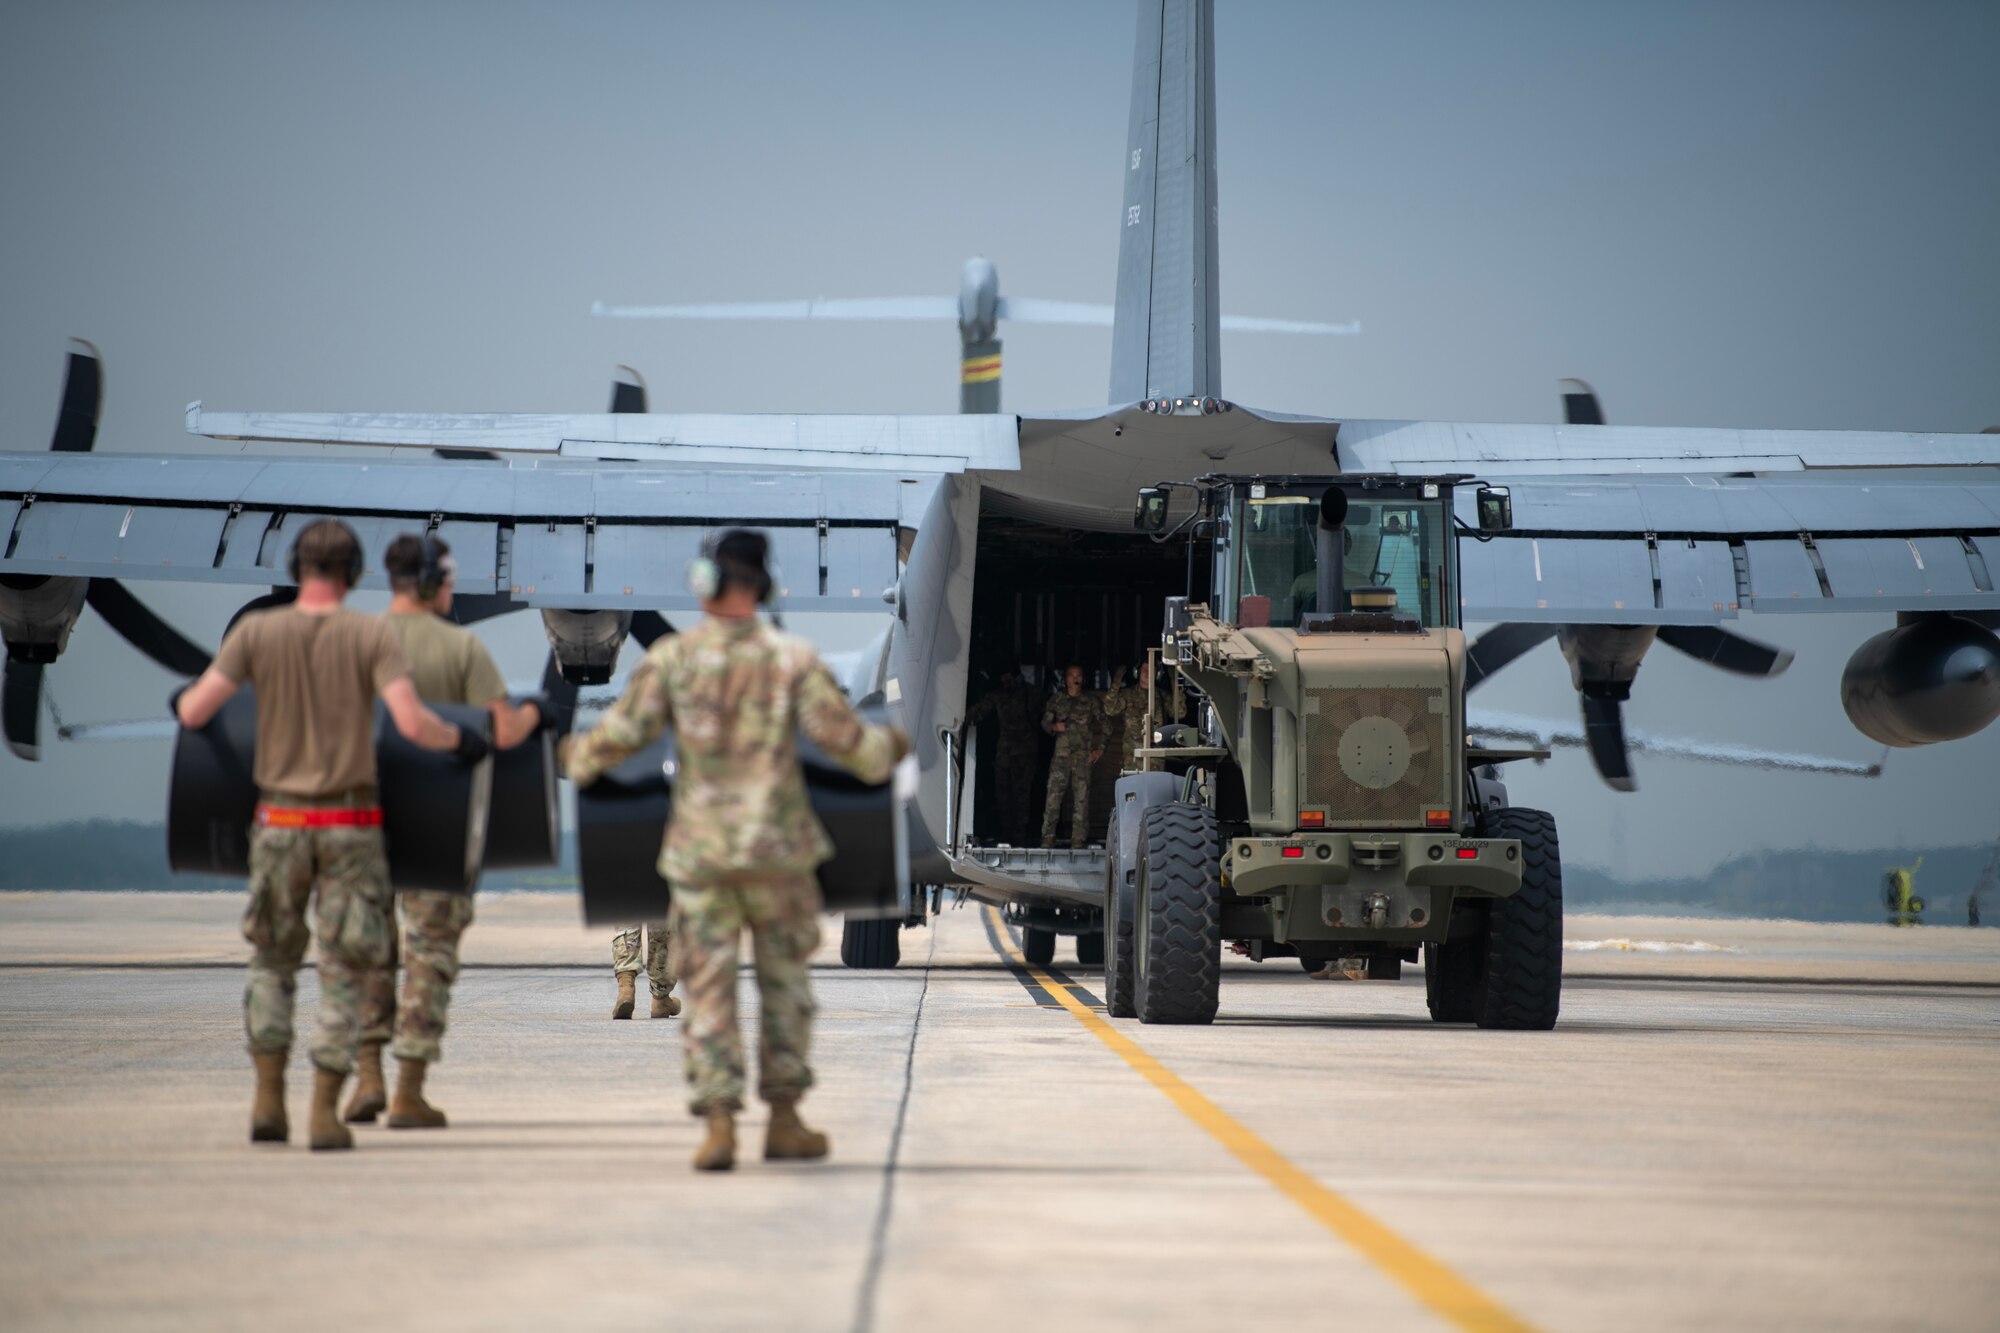 Airmen carrying barrels towards a C-130 for an offloading method B training